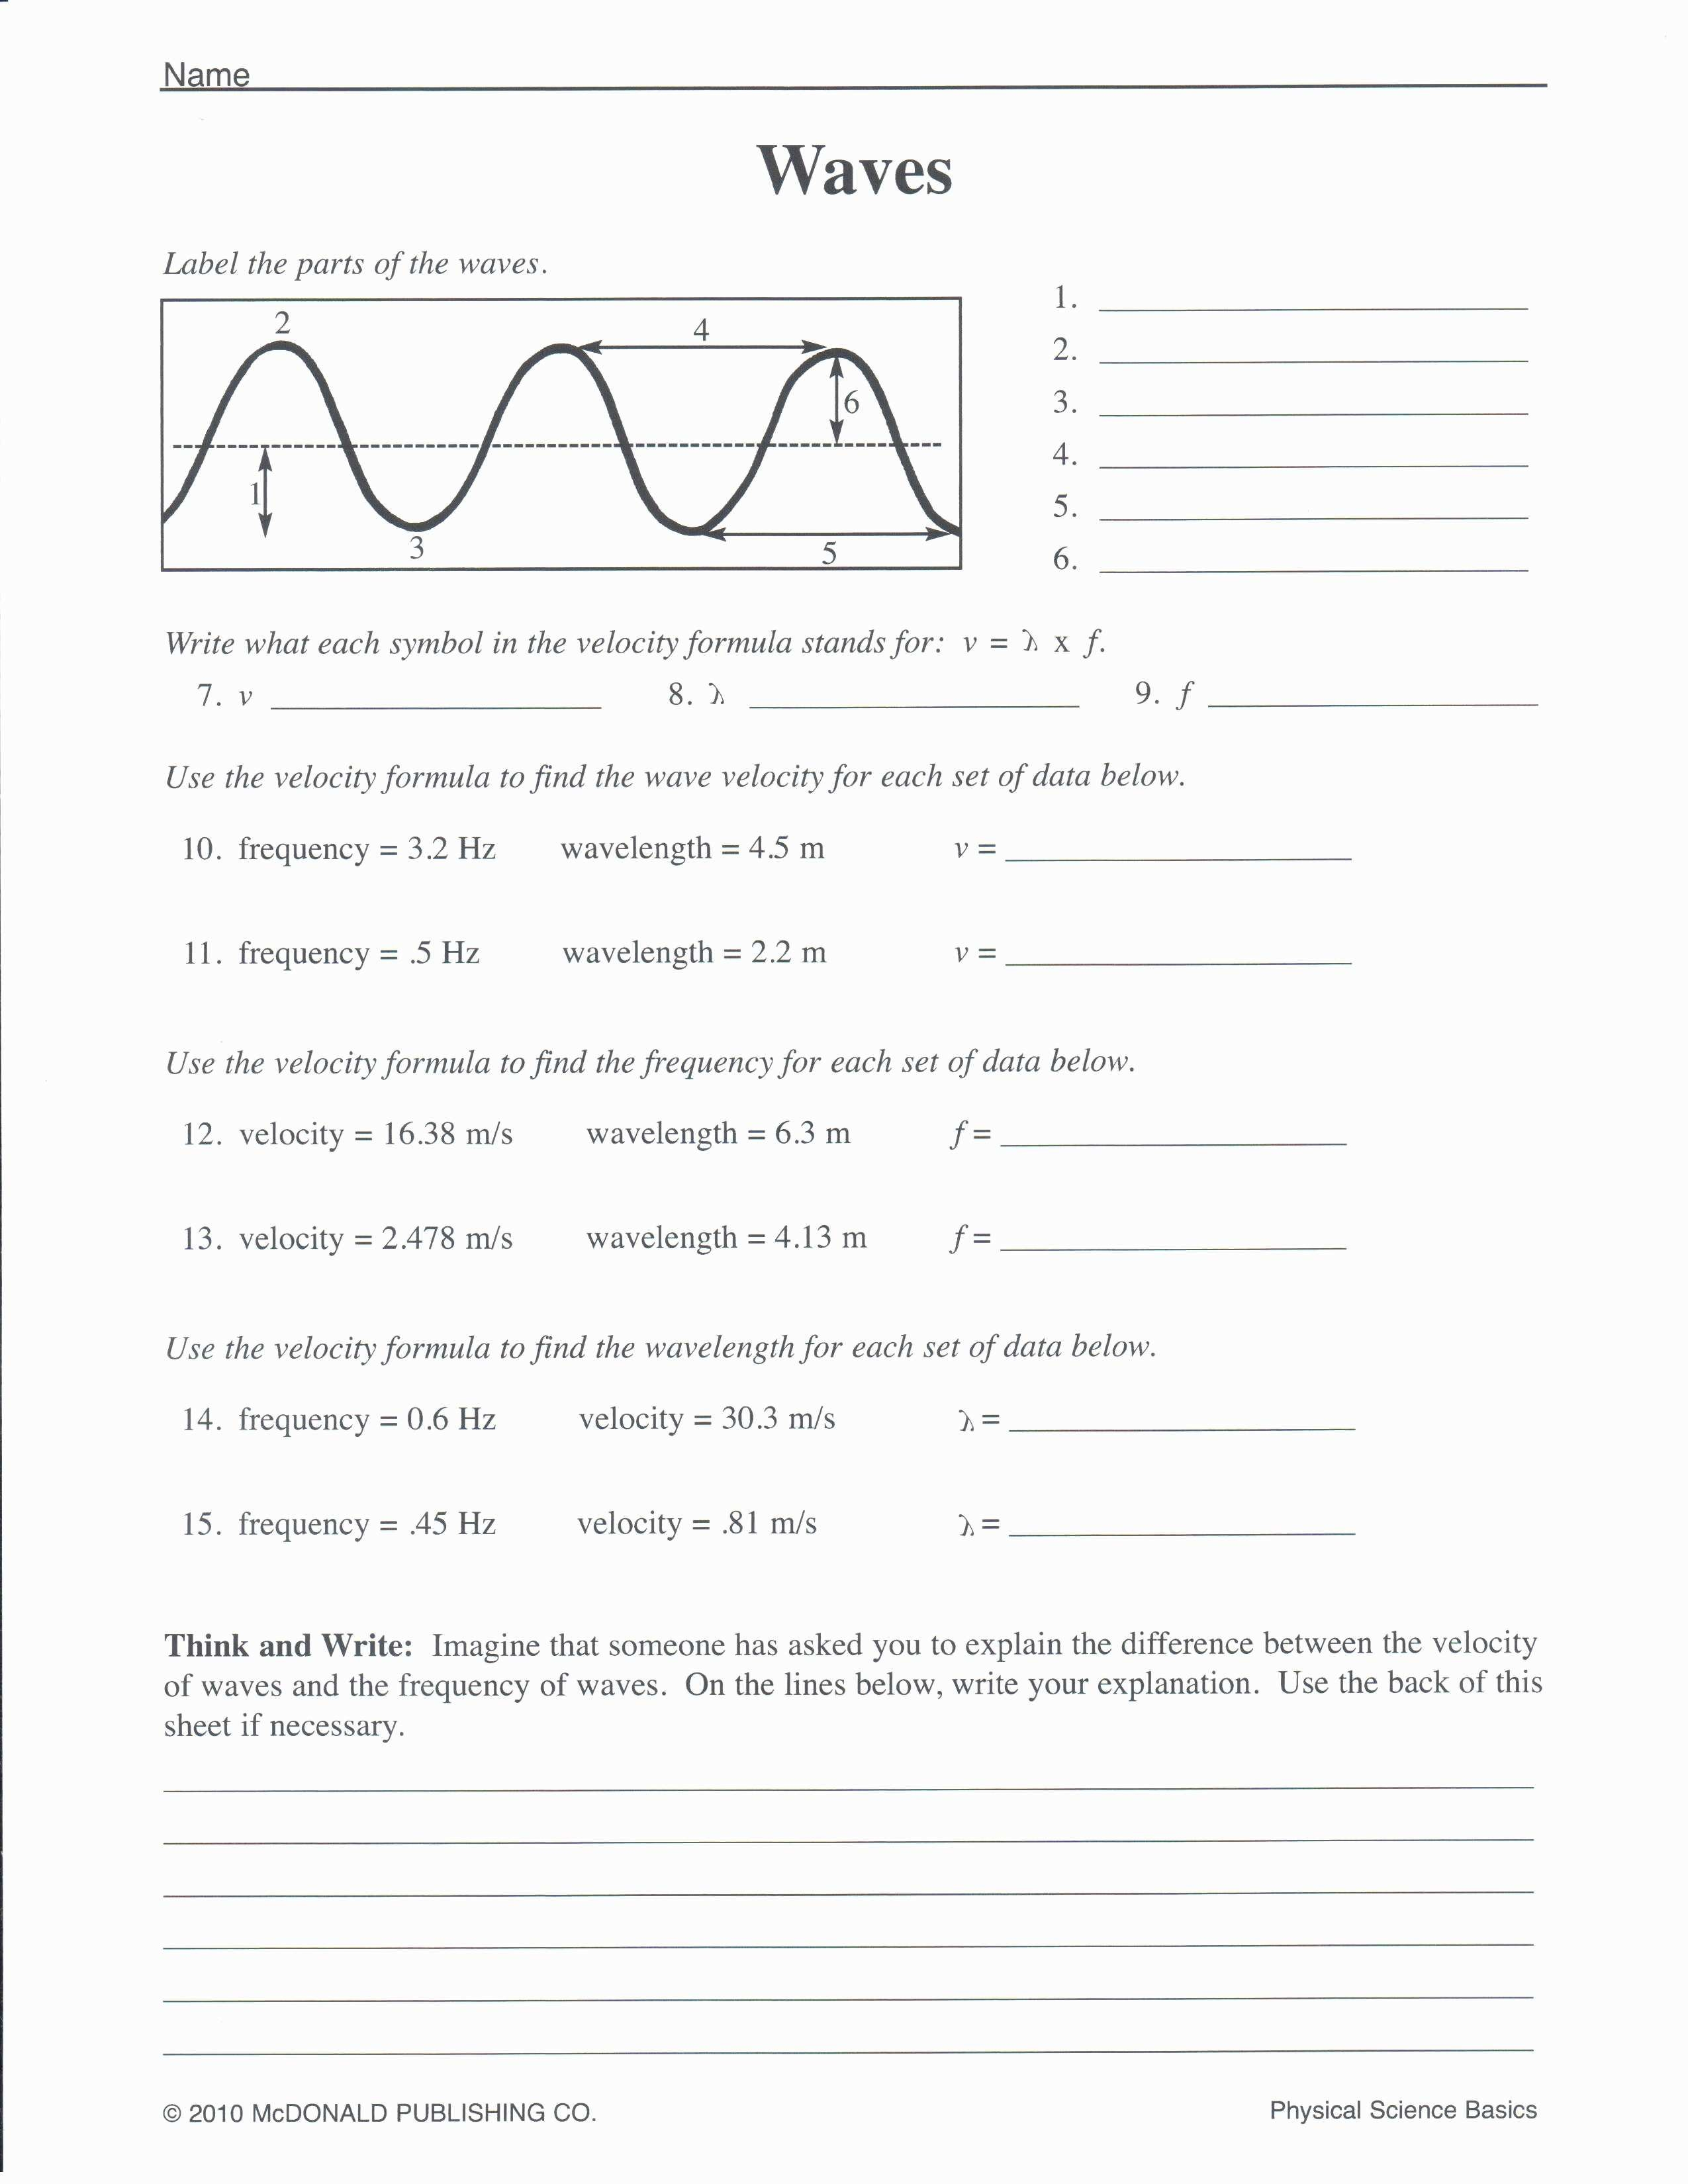 Best Solutions Of Earth Science Worksheets High School Gallery As Well As Earth Science Worksheets High School